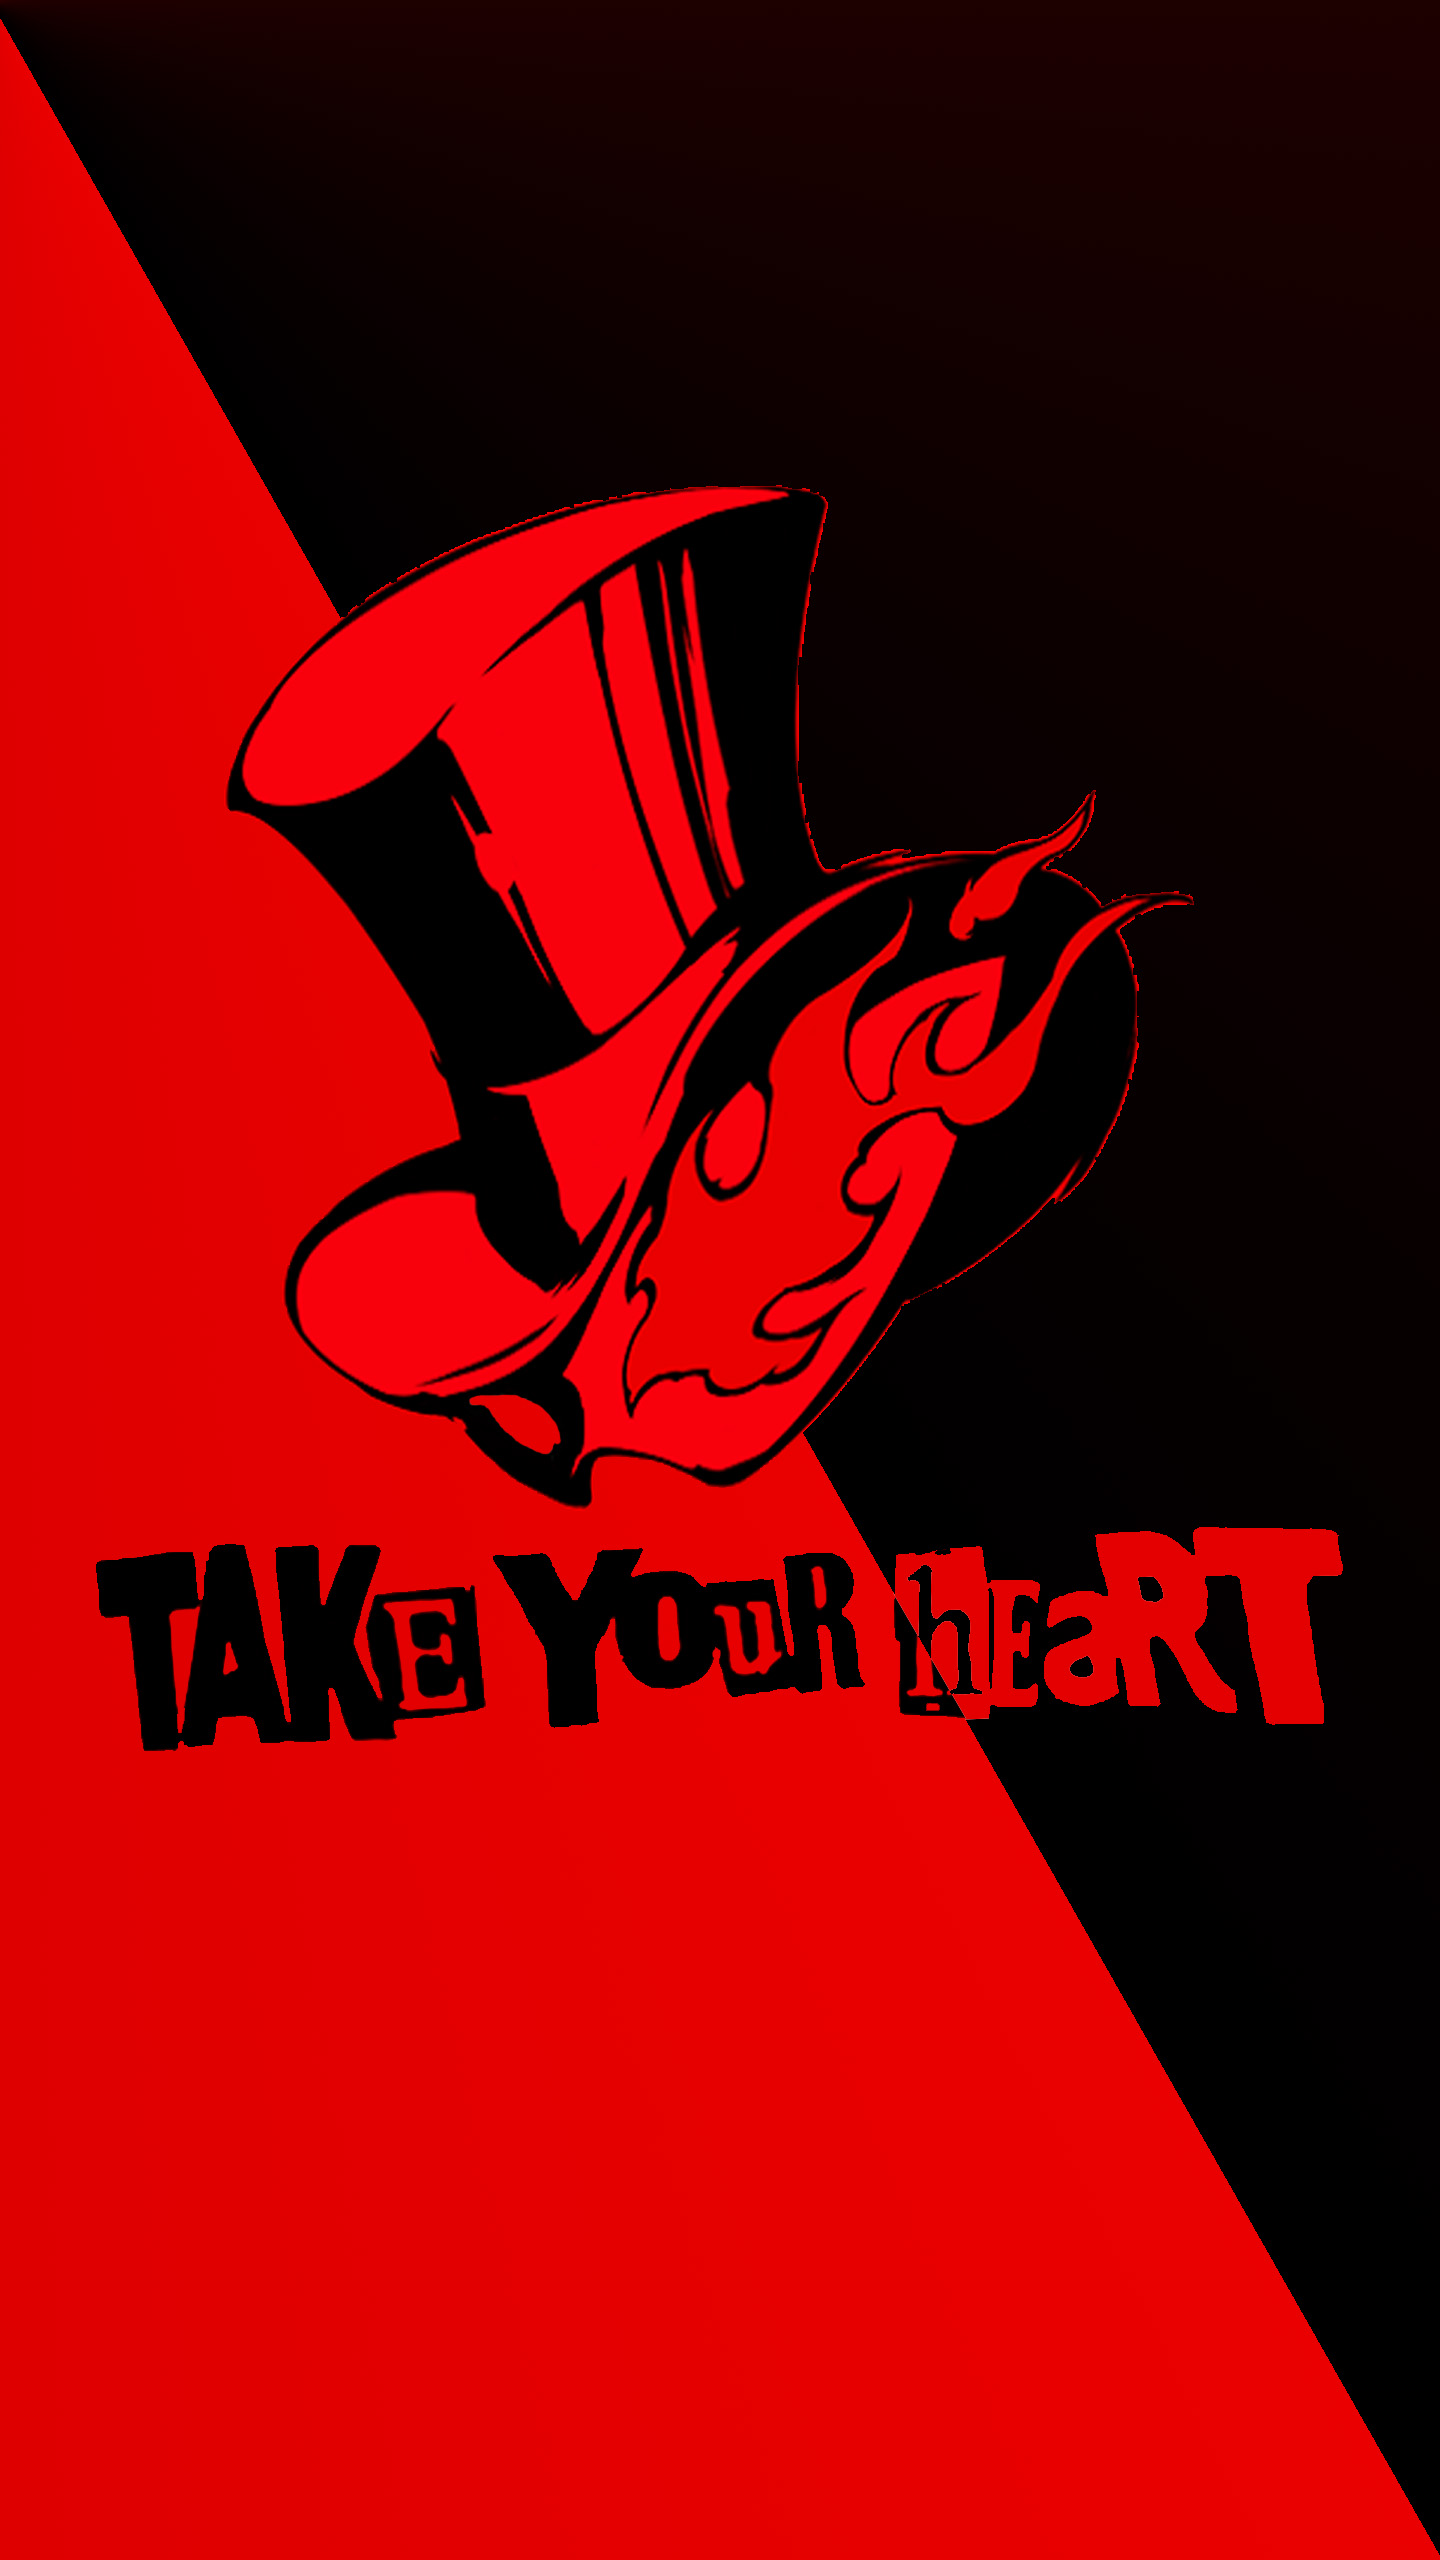 persona 5 phone Wallpapers